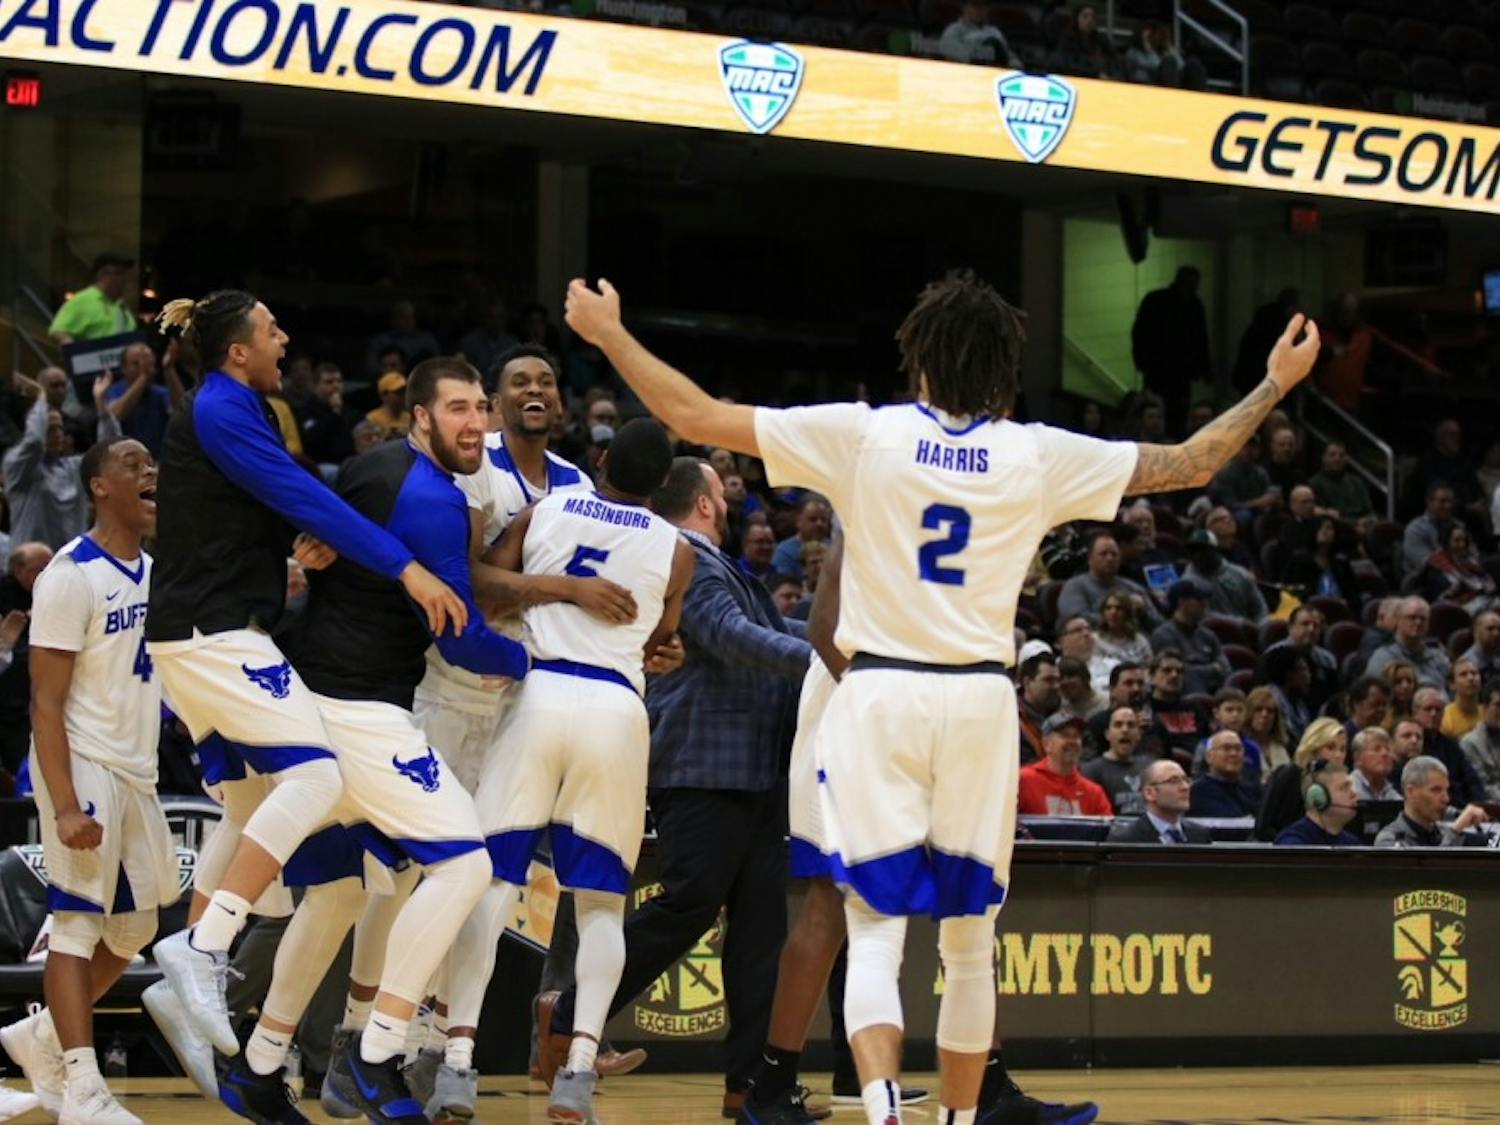 Junior forward Jeremy Harris celebrates towards the bench during the MAC Championship tourney. Men’s basketball would celebrate its best season in school history winning its first-ever NCAA Tournament game.